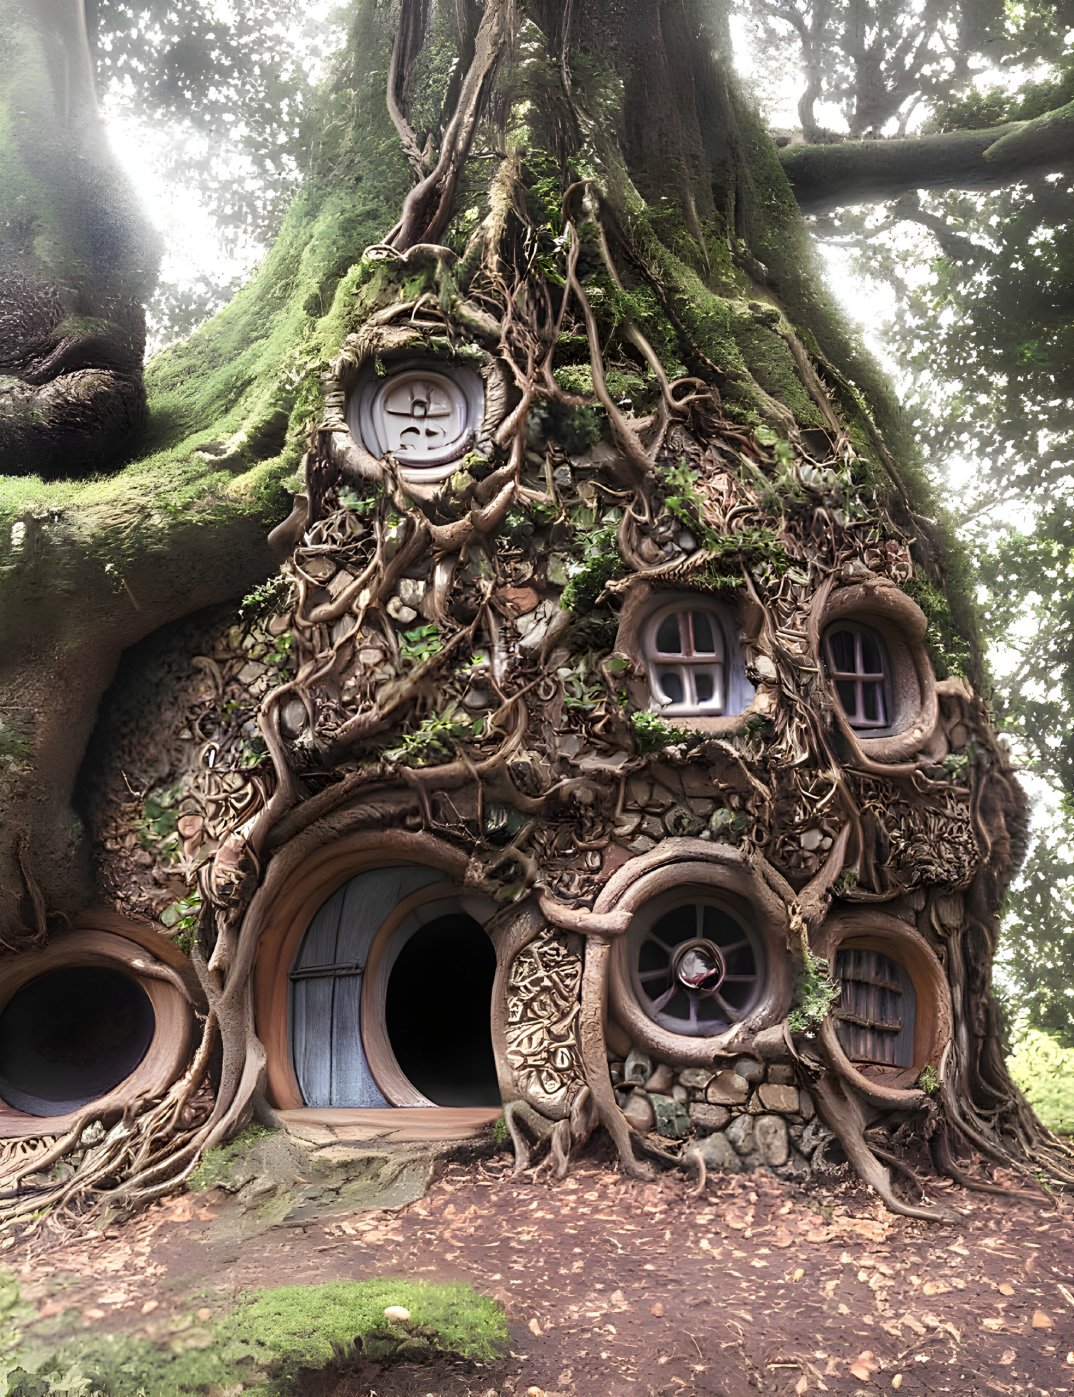 Whimsical treehouse with round doors and windows nestled in gnarled branches